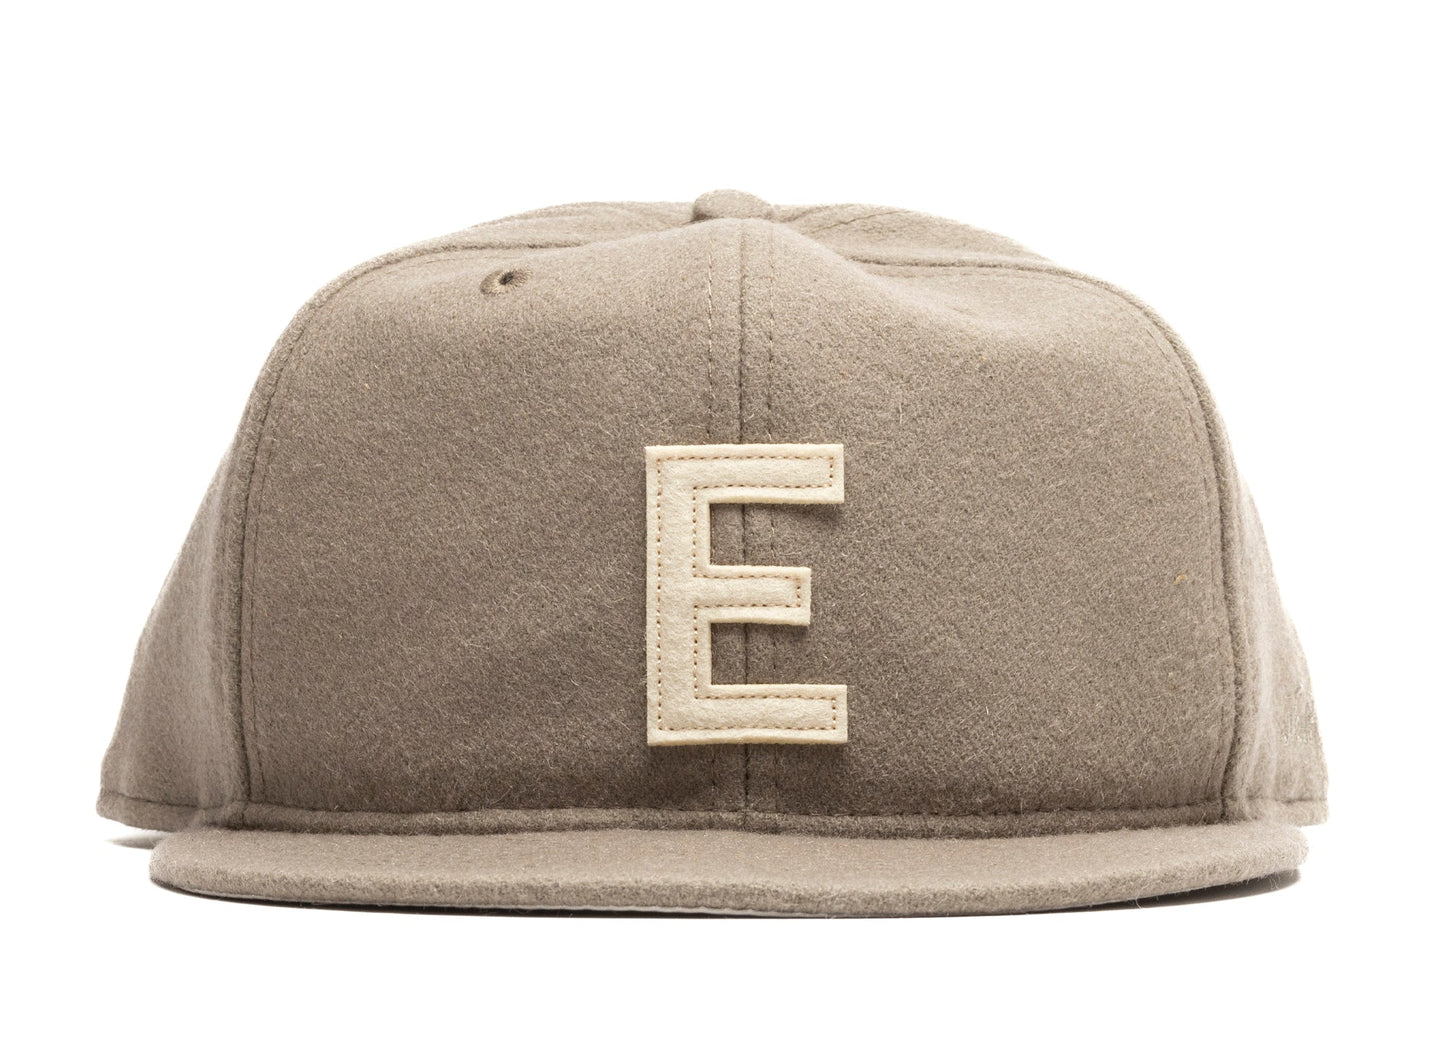 Fear of God Holiday Essentials Hat in Tan